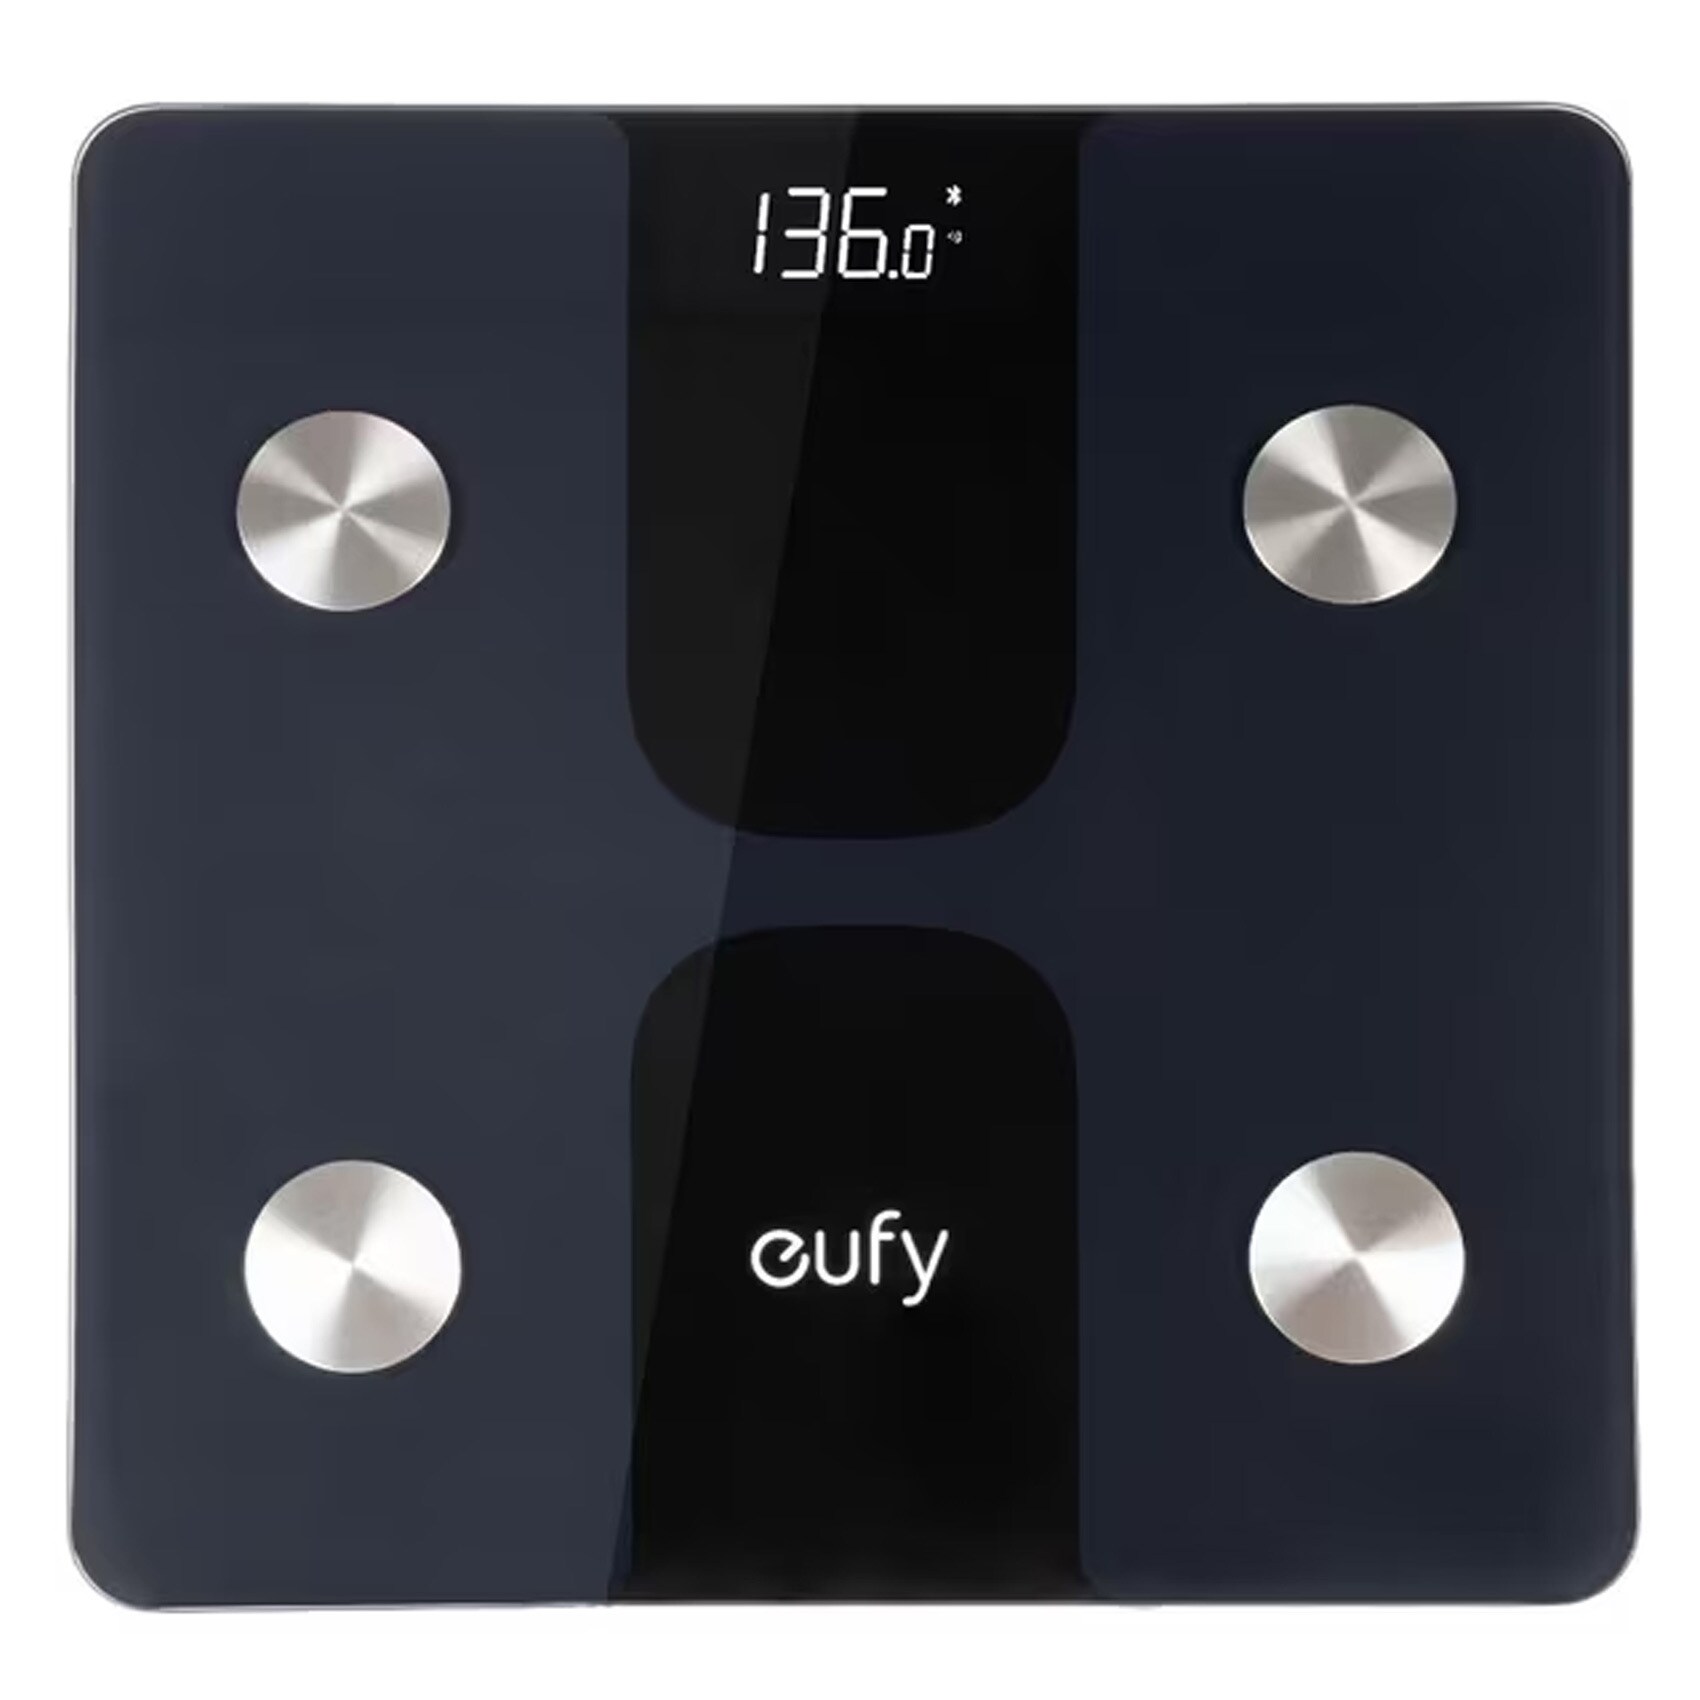 Smart scale c1 eufy by anker price 69 Qr delivery 77017017